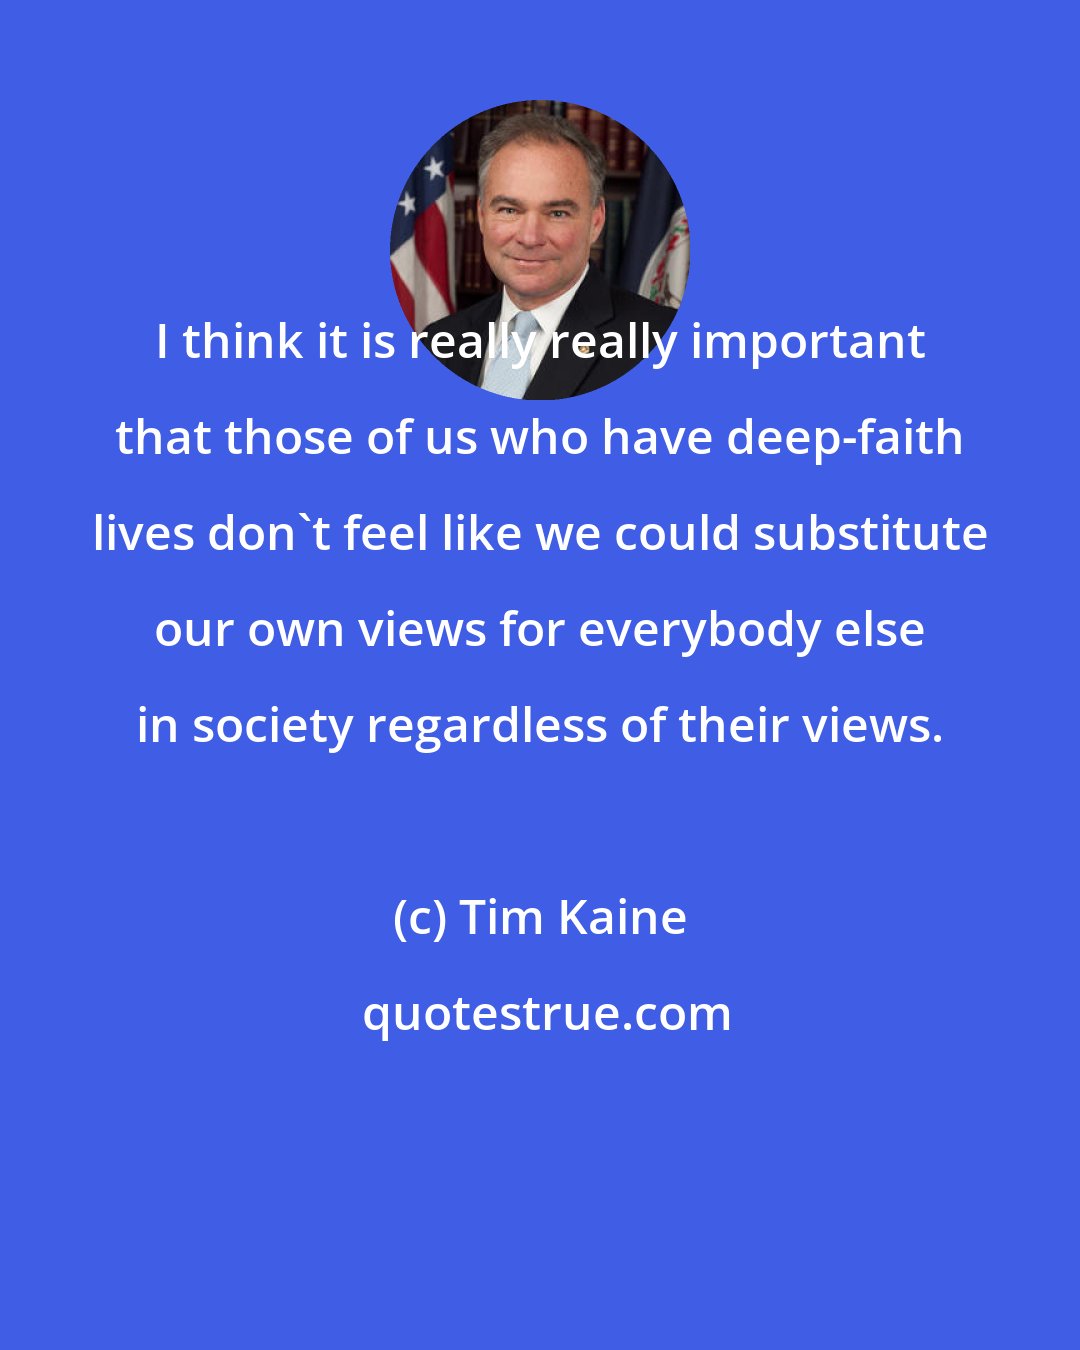 Tim Kaine: I think it is really really important that those of us who have deep-faith lives don't feel like we could substitute our own views for everybody else in society regardless of their views.